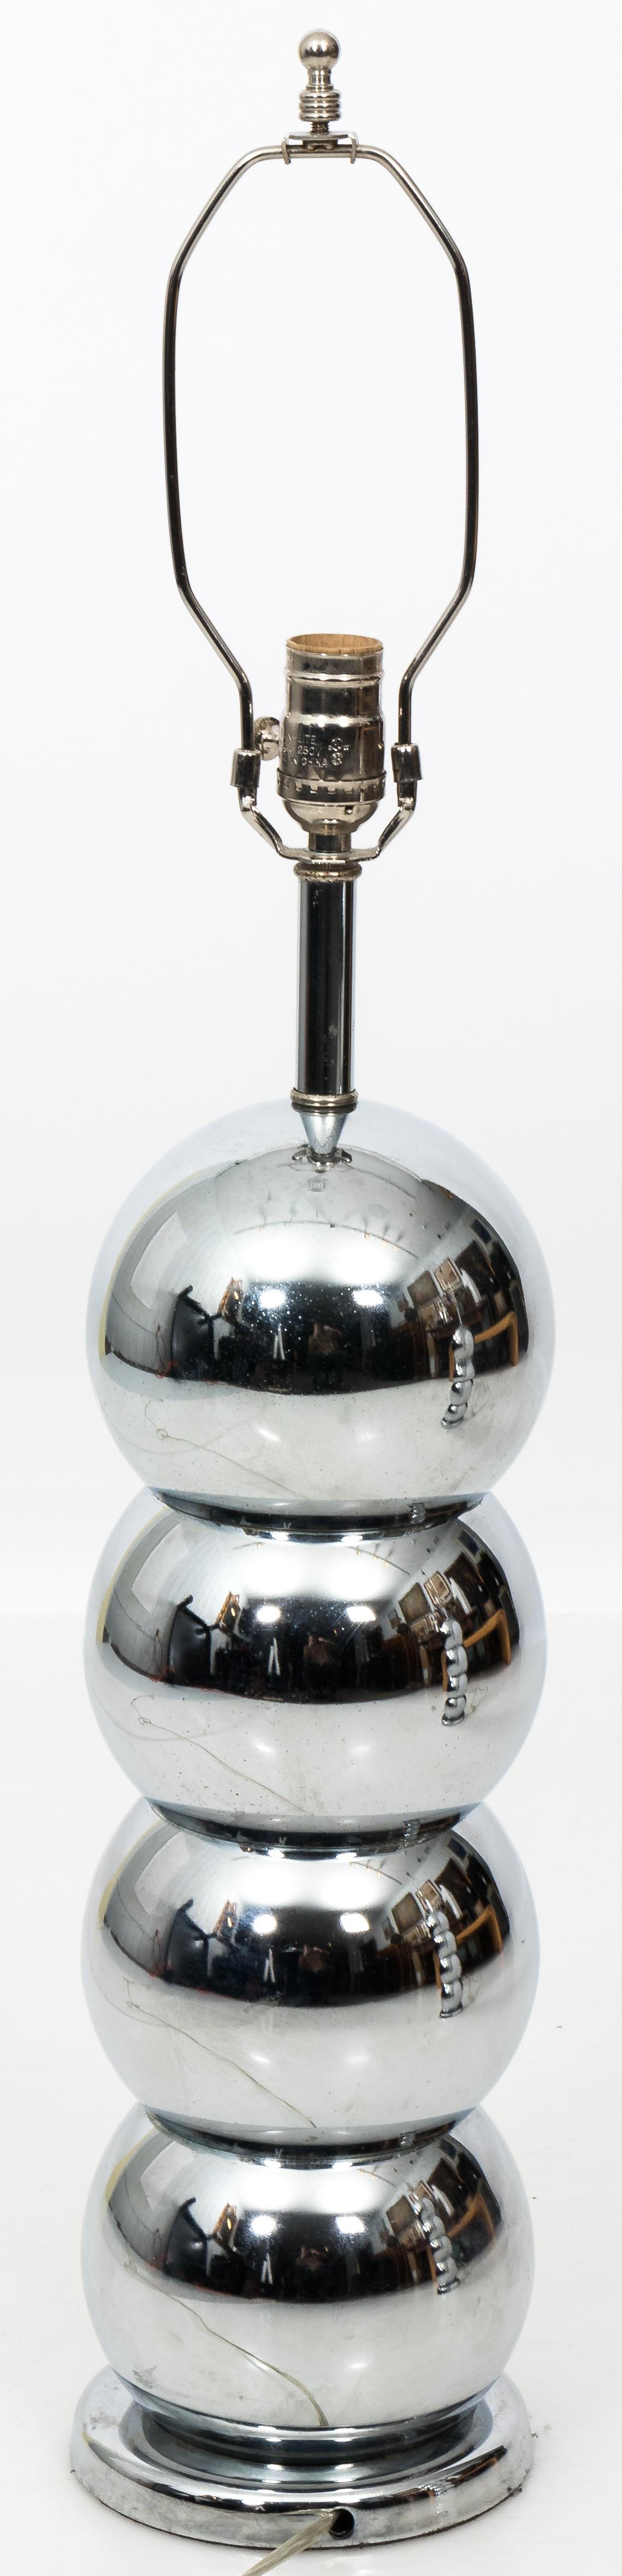 Polished Pair of Chrome Ball Lamps